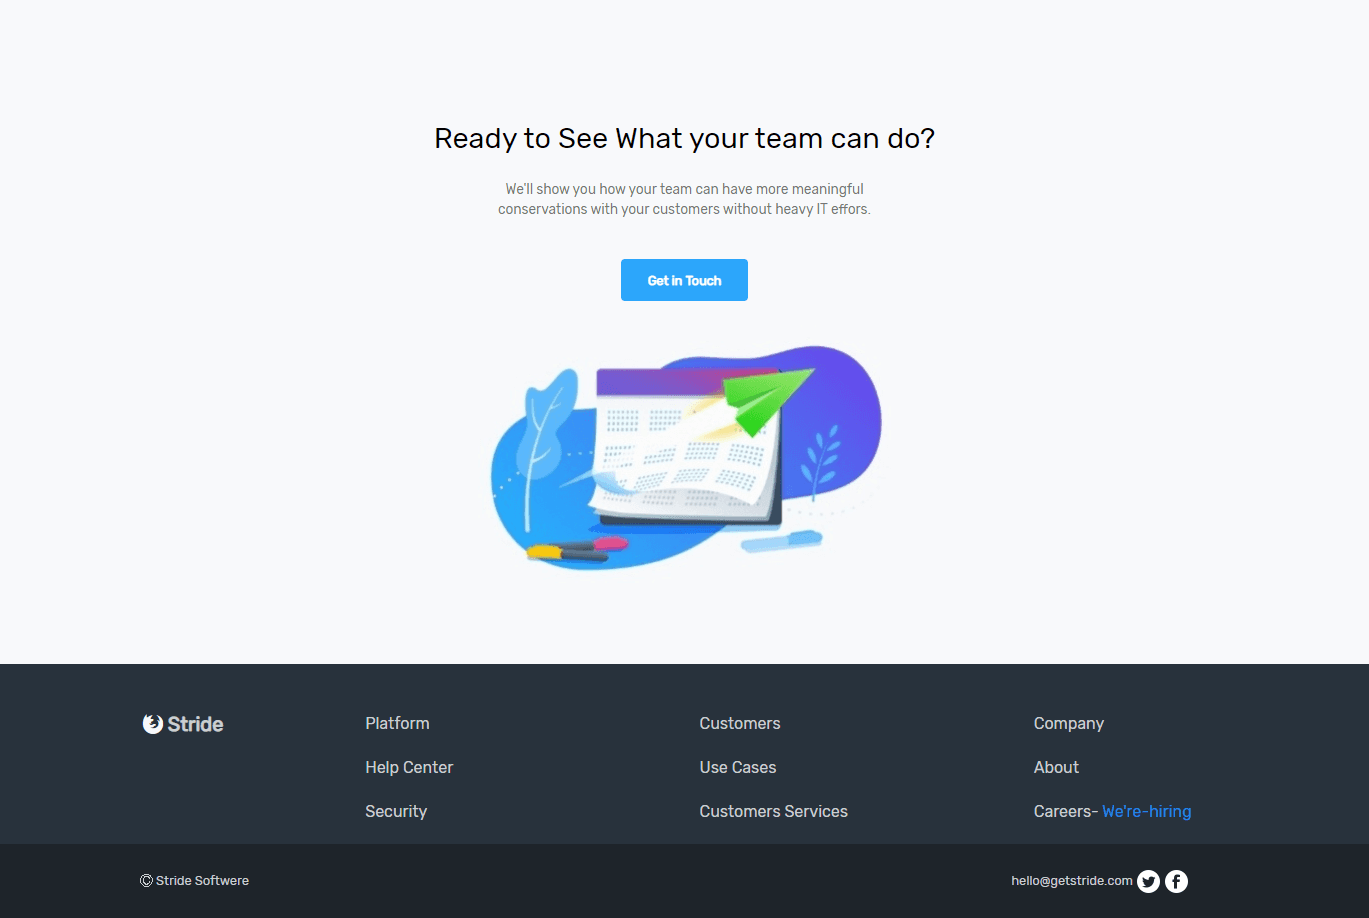 footer with social media icons and get in touch button